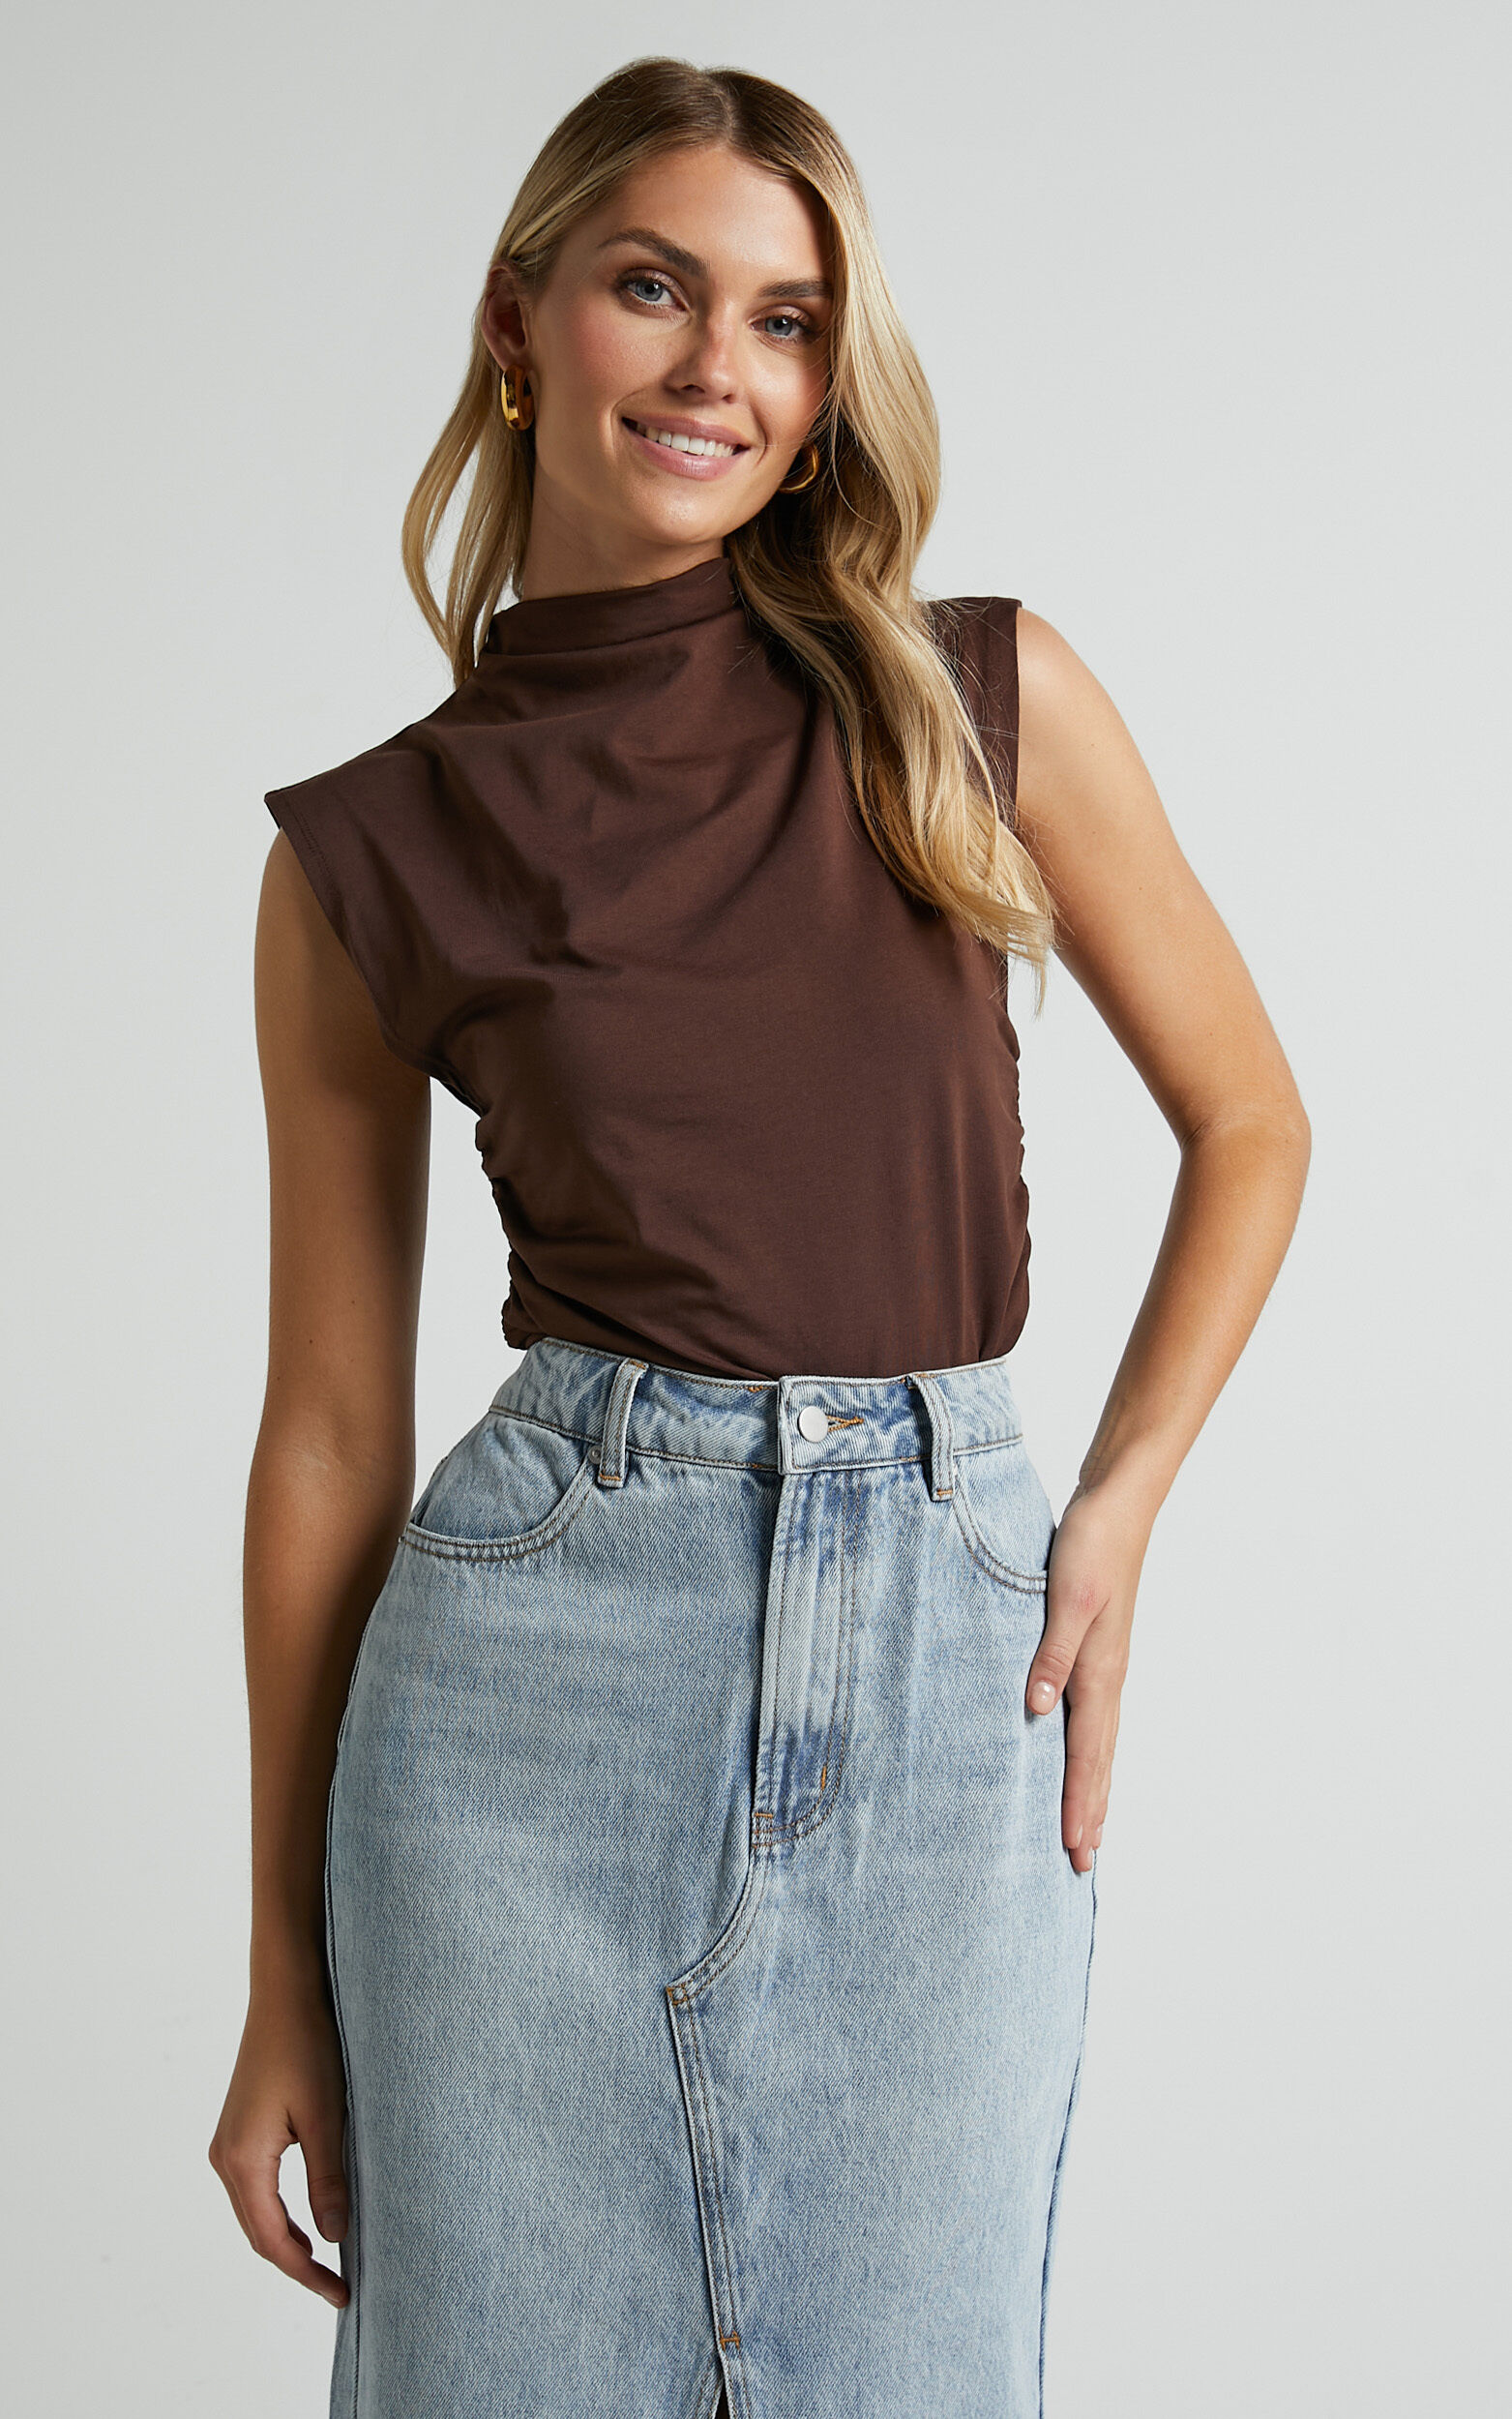 Jenner Top - High Neck Ruched Side Top in Chocolate - 06, BRN1